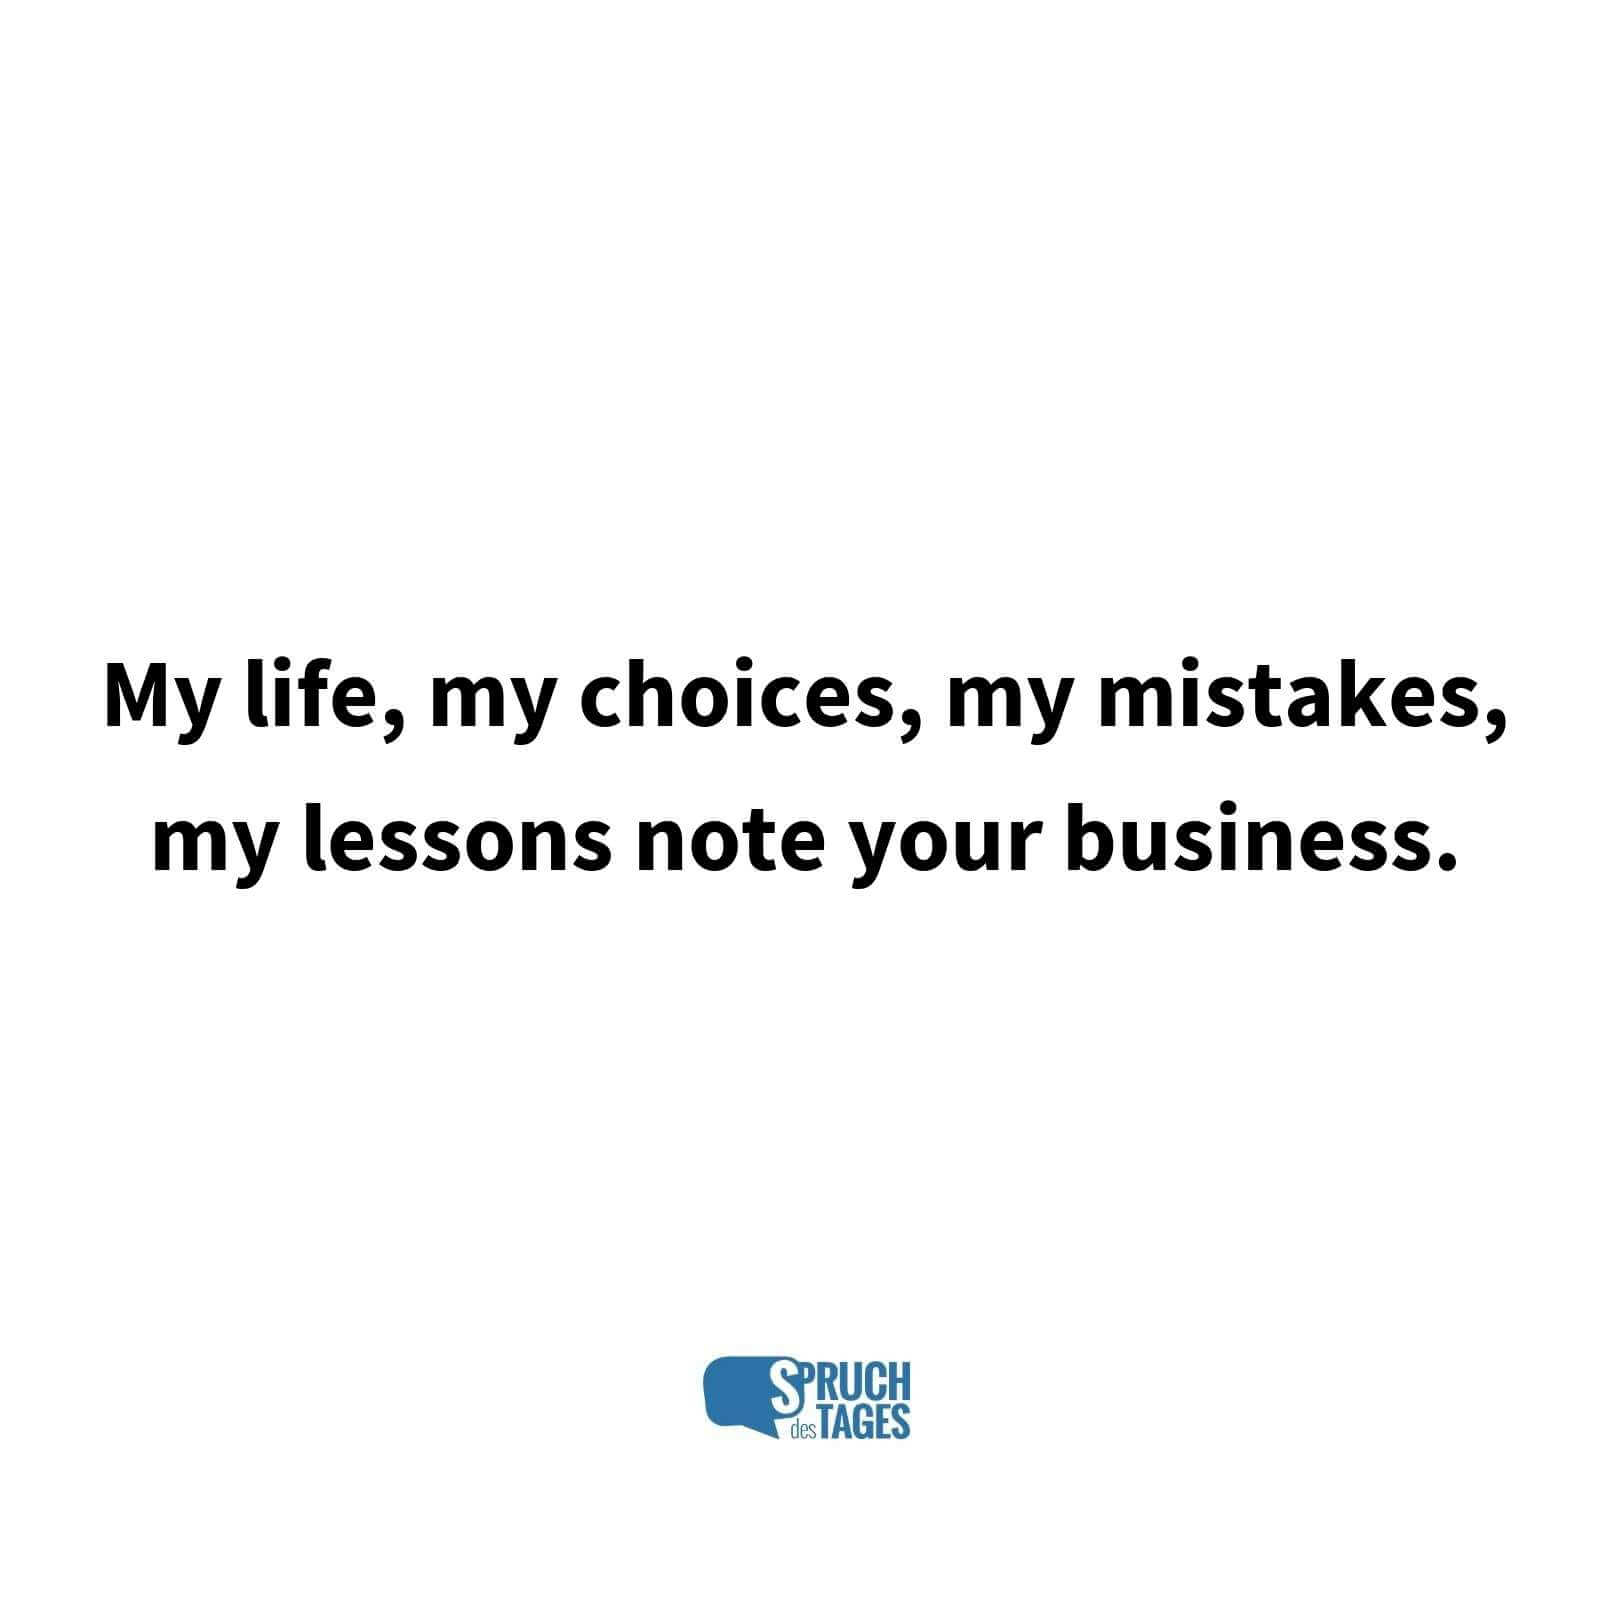 My life, my choices, my mistakes, my lessons note your business.